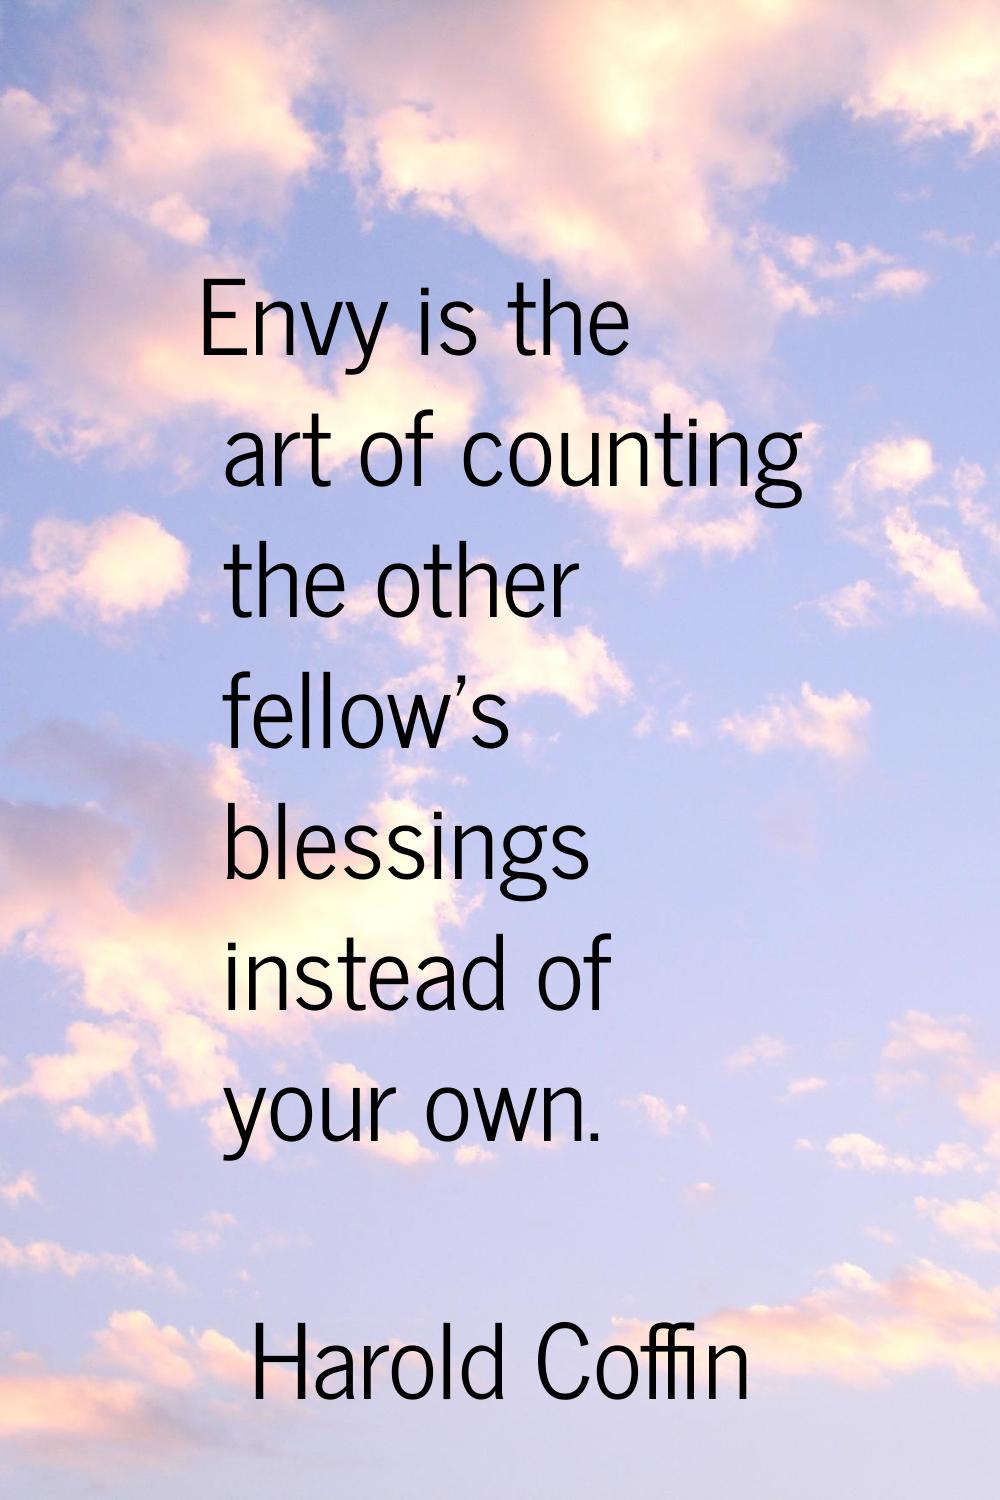 Envy is the art of counting the other fellow's blessings instead of your own.